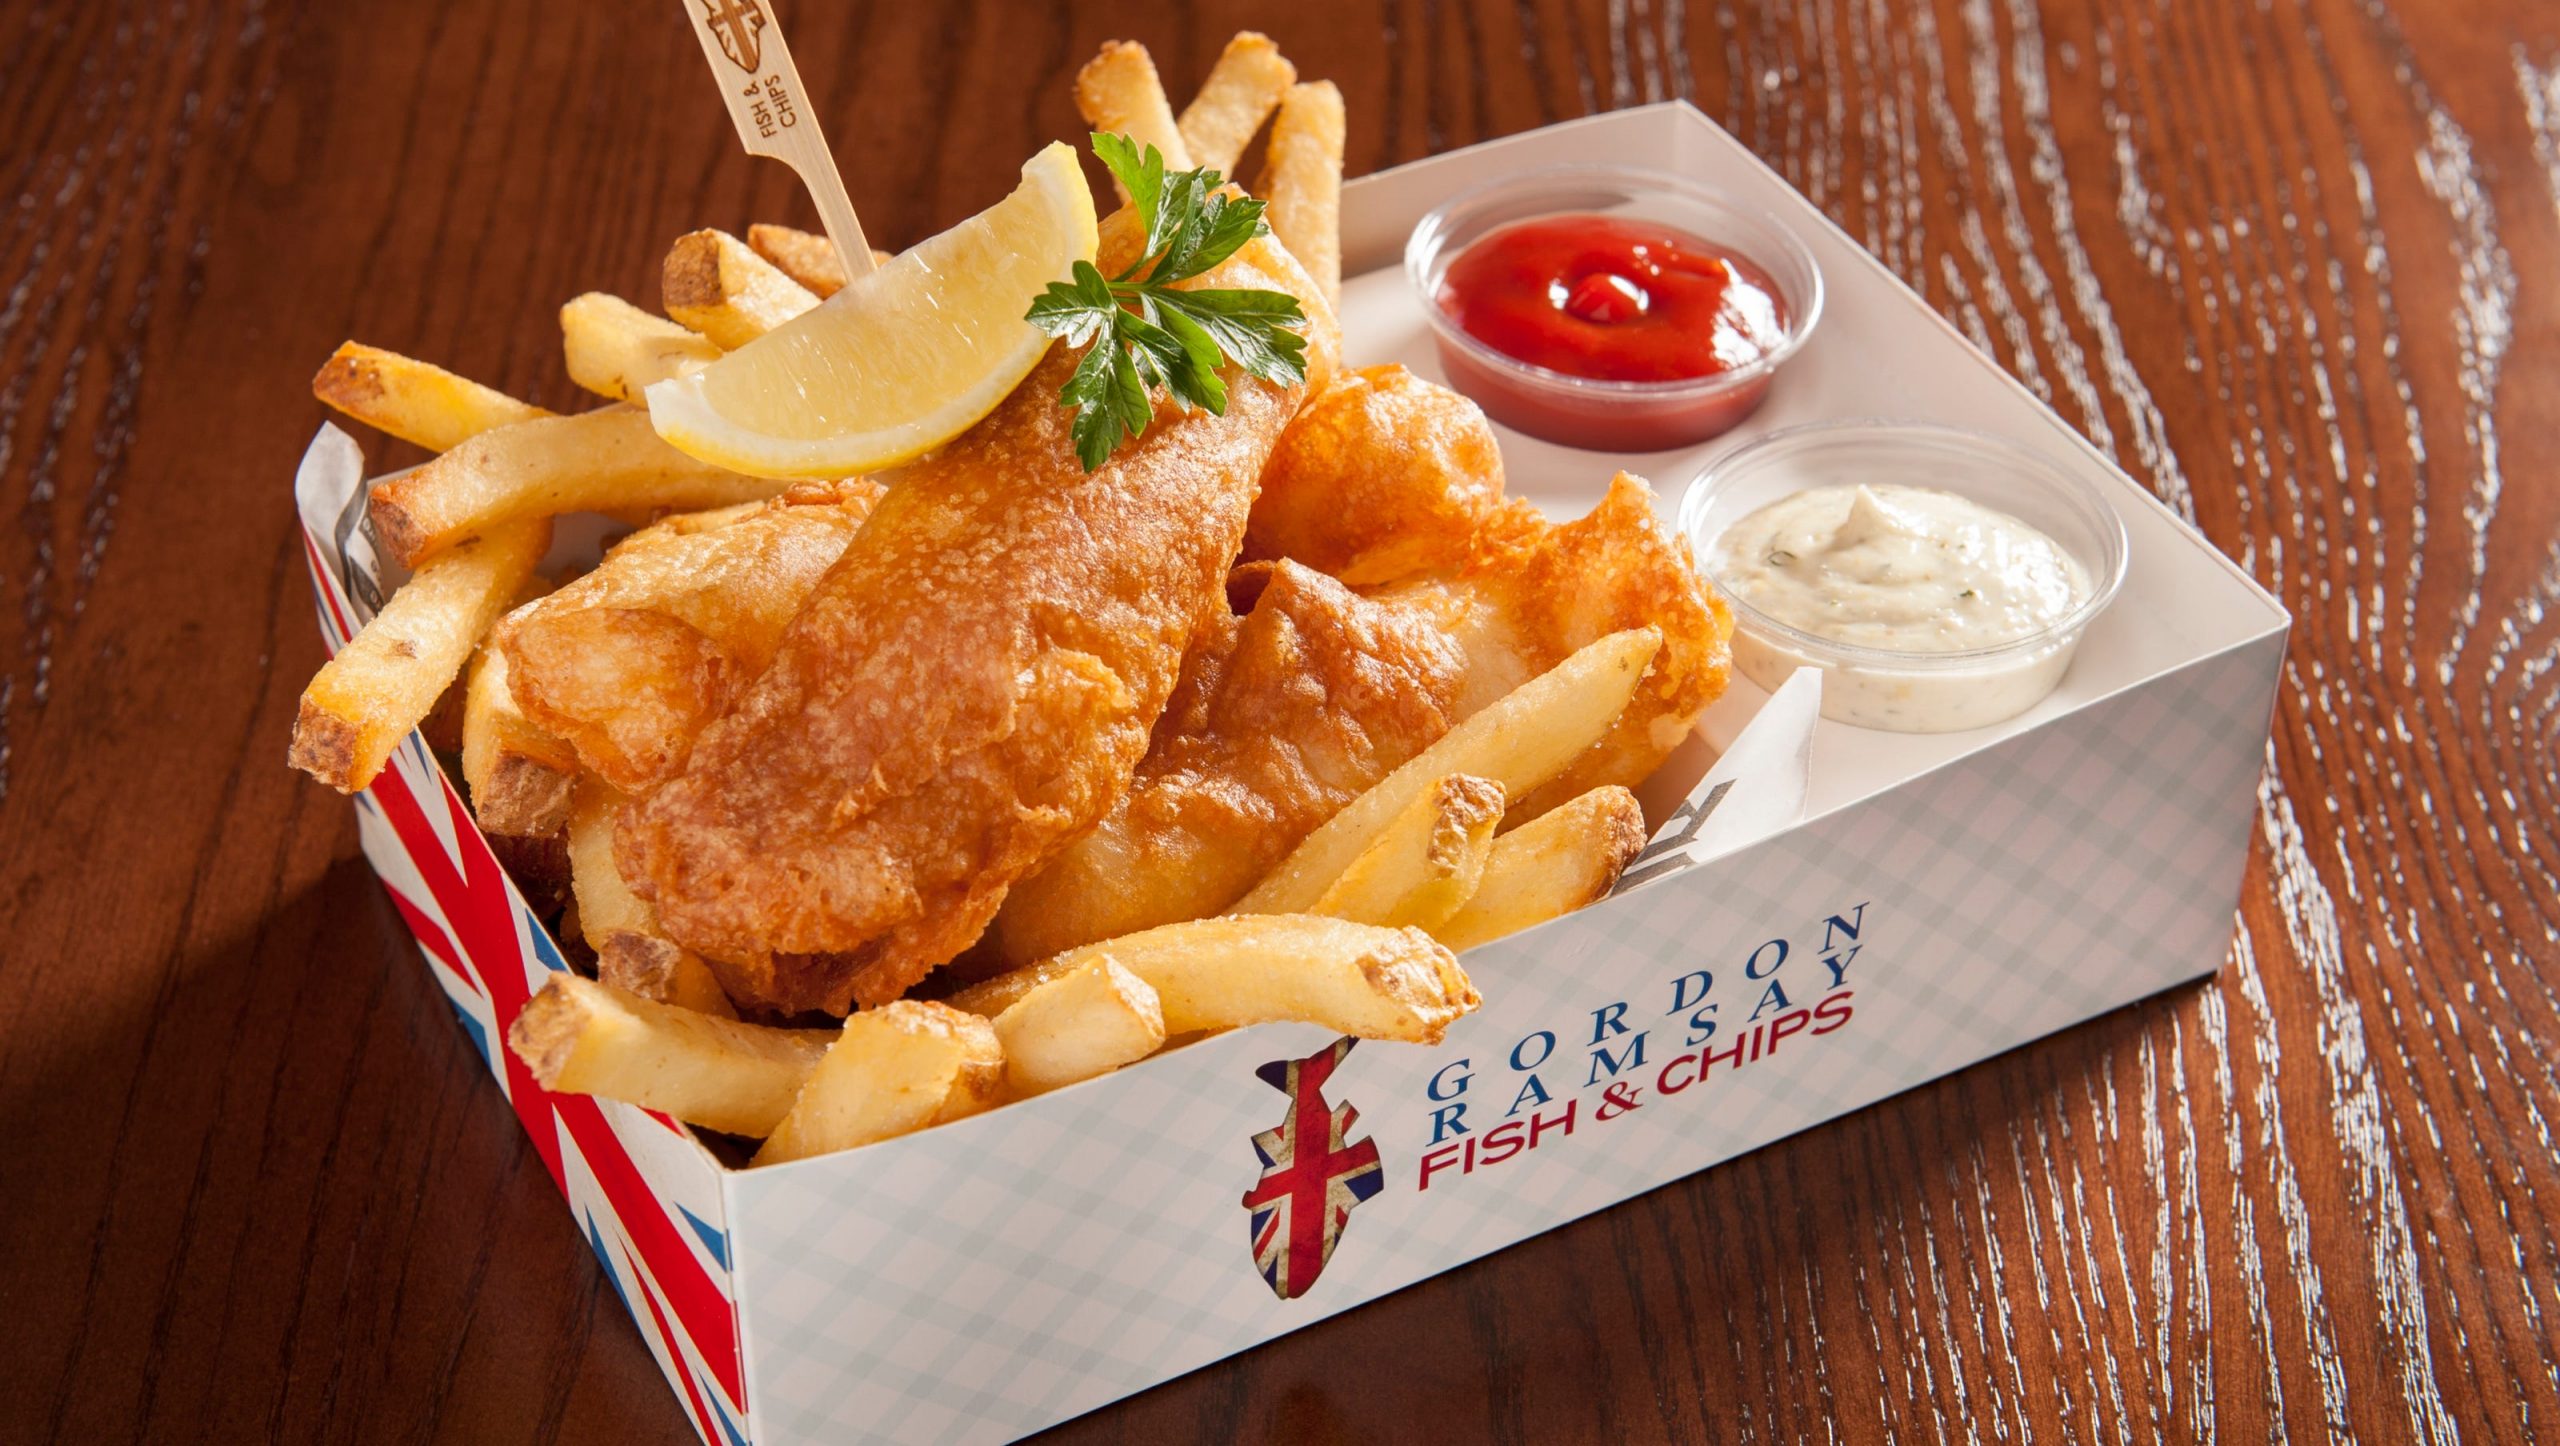 Gordon Ramsay To Open Fish & Chips Casual Restaurant at